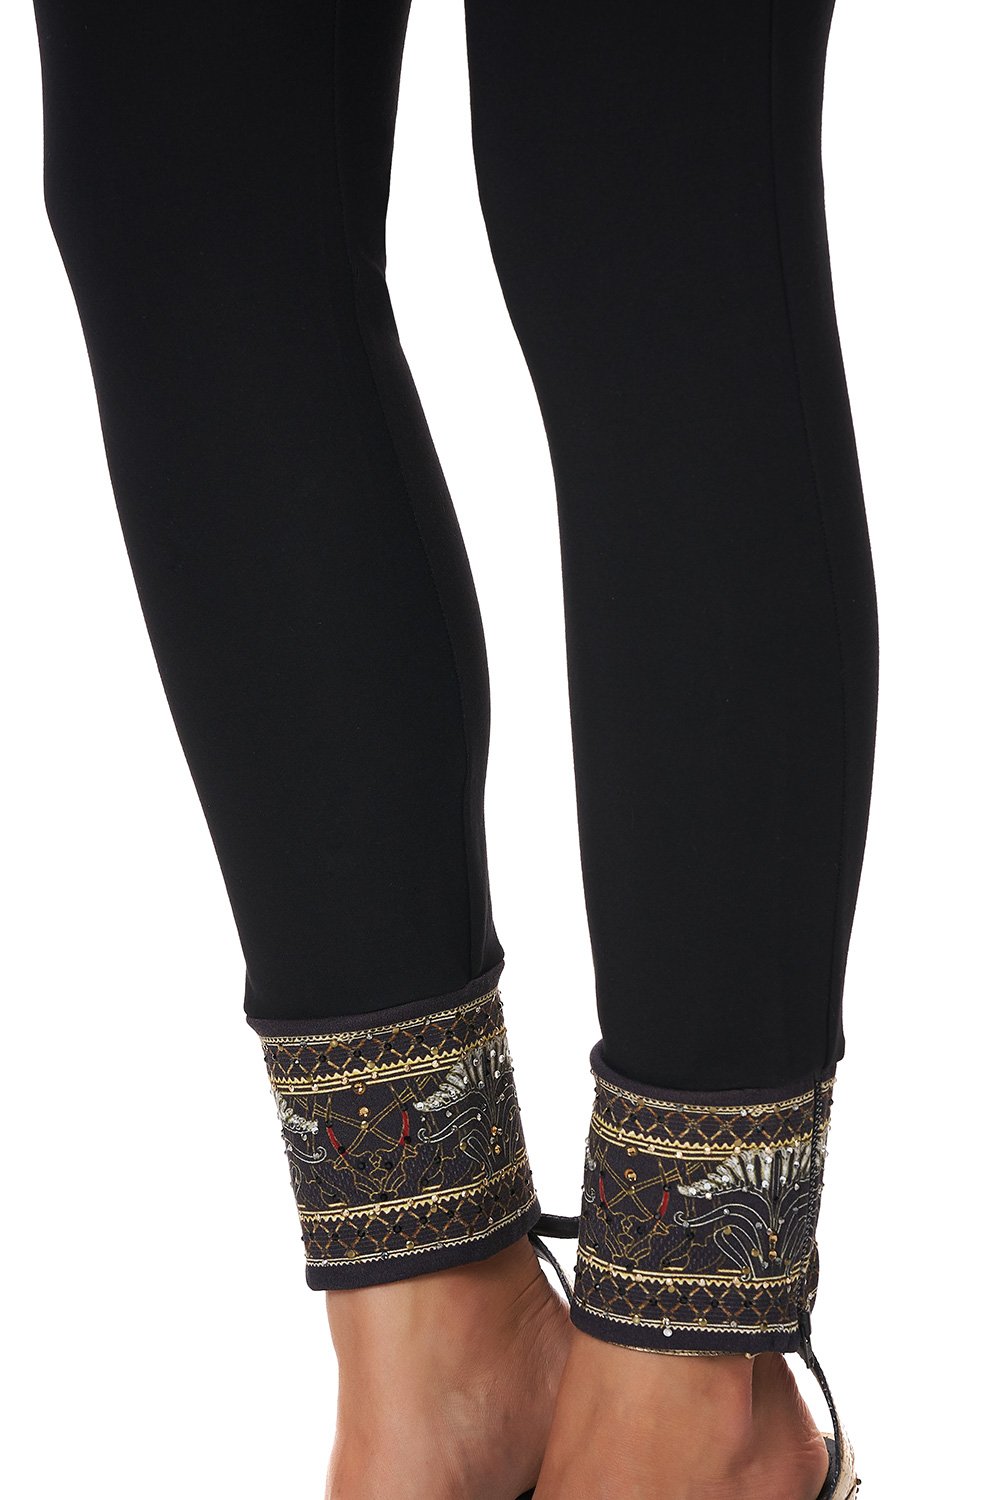 LEGGINGS WITH CONTRAST CUFF WISE WINGS